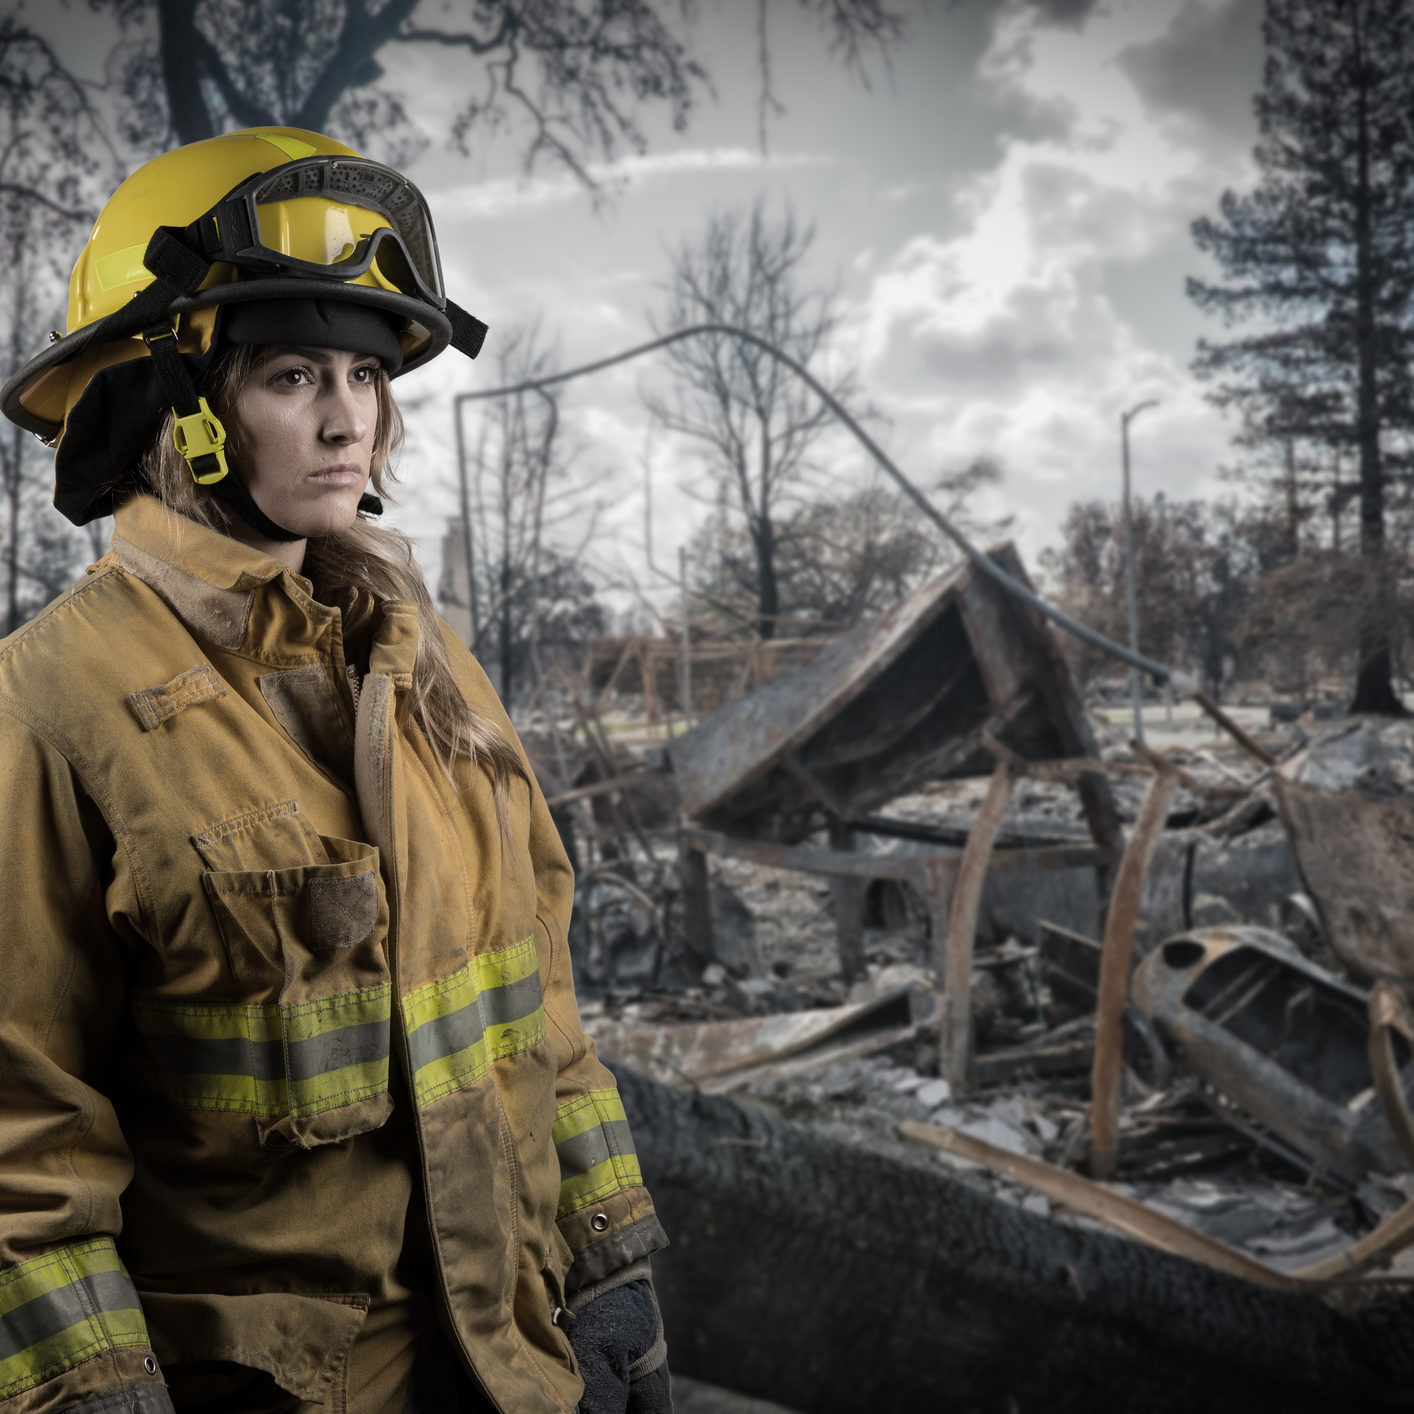 California firefighter by Coffey Park neighborhood after wildfire destroyed homes in the neighborhood ++composite. Background image also taken by photographer++